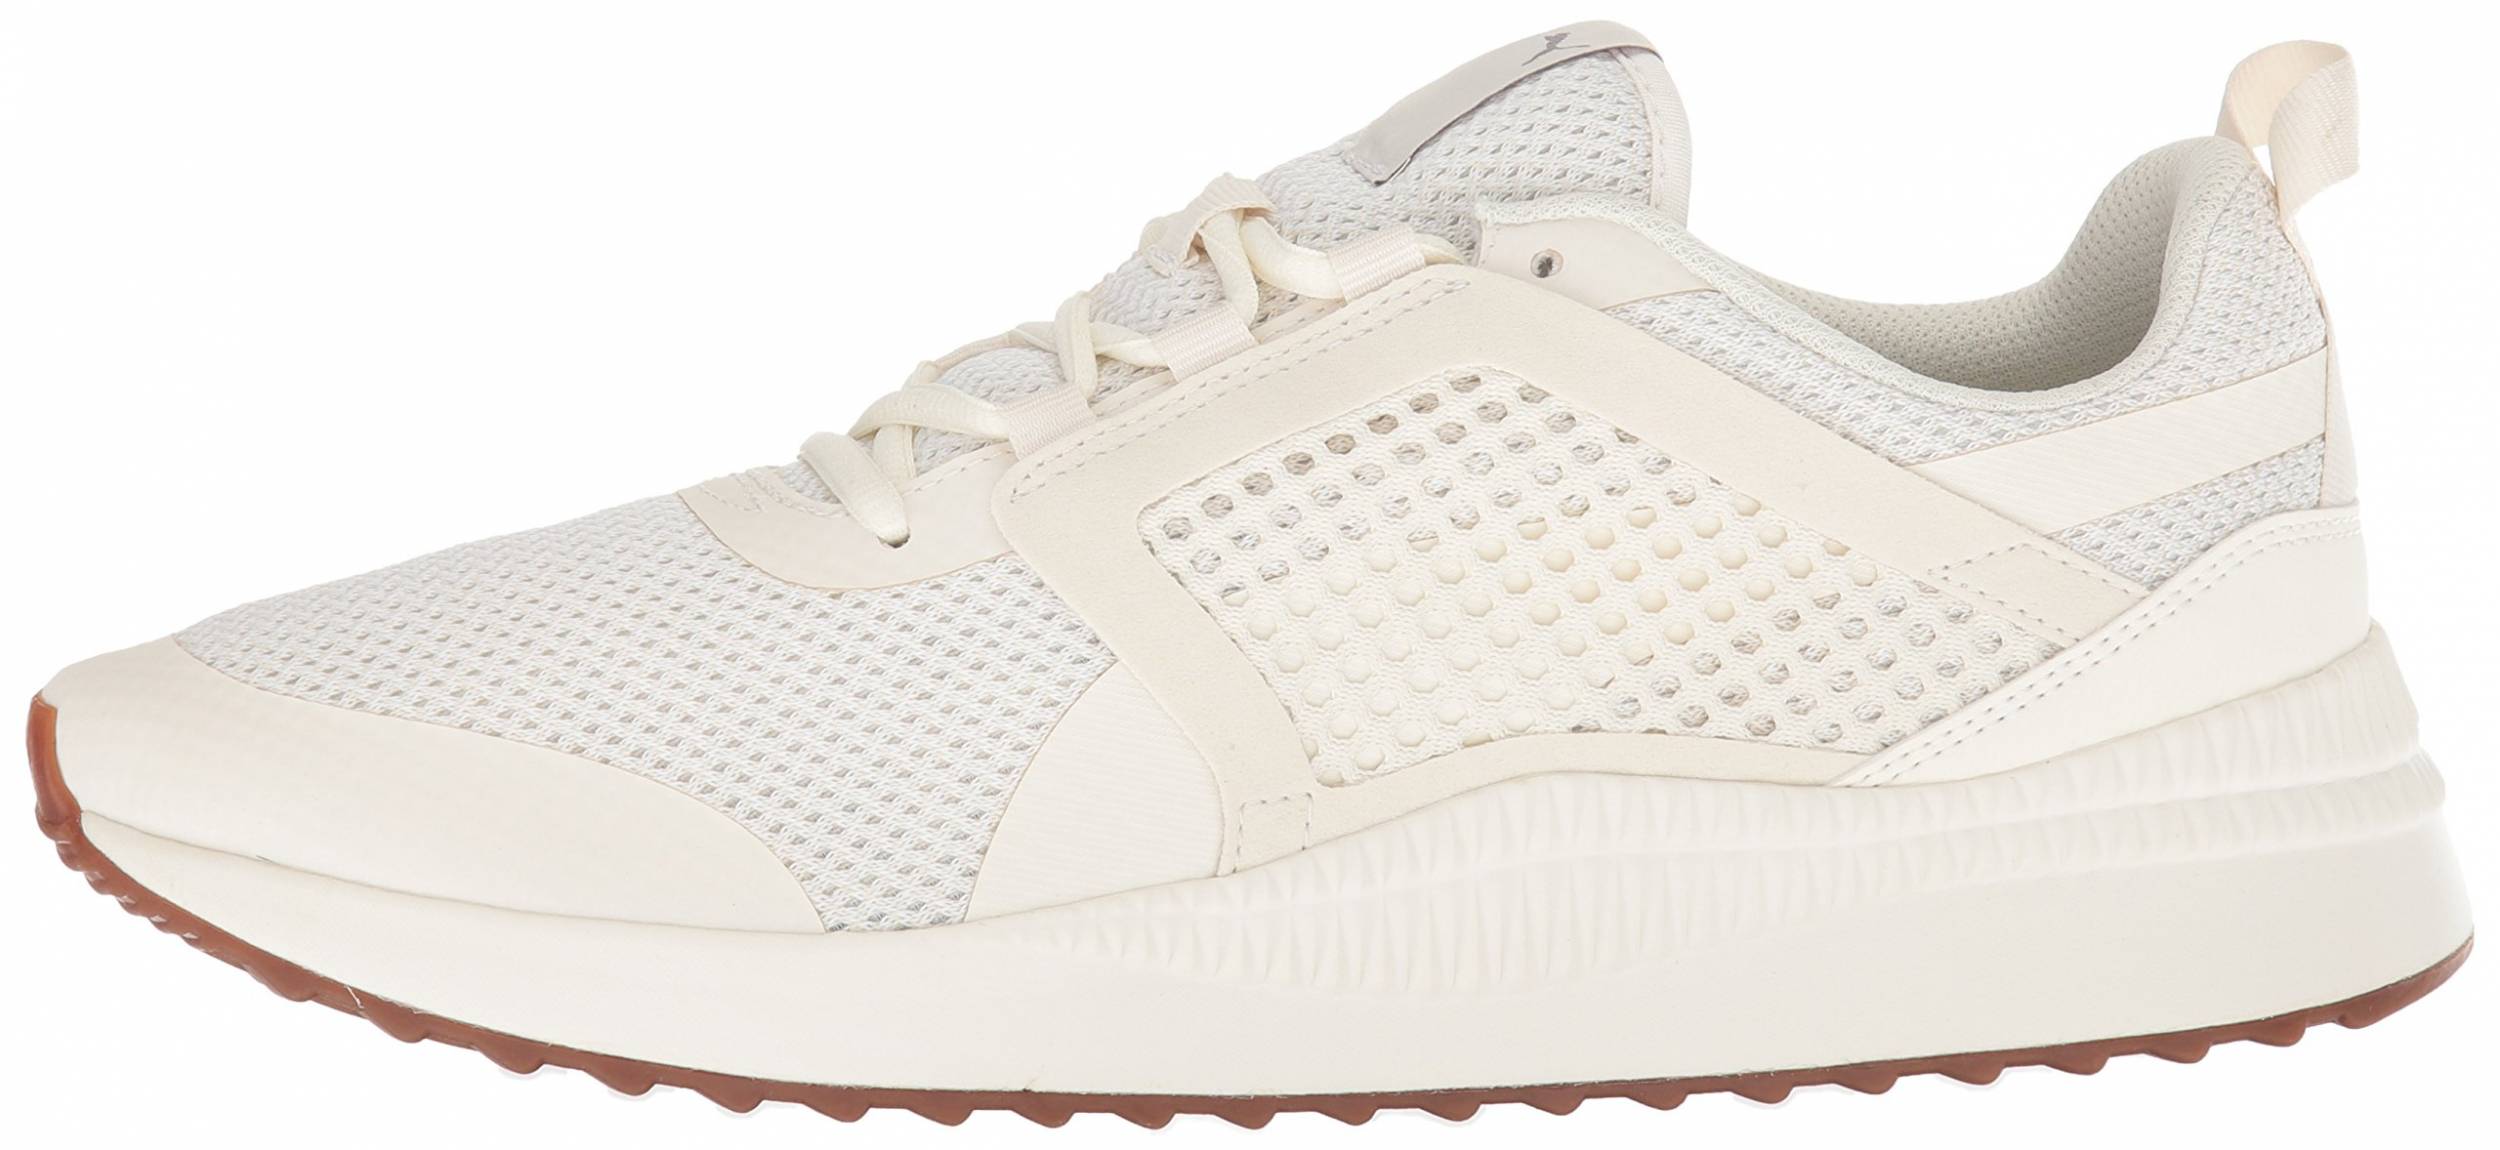 puma pacer next cage women's review